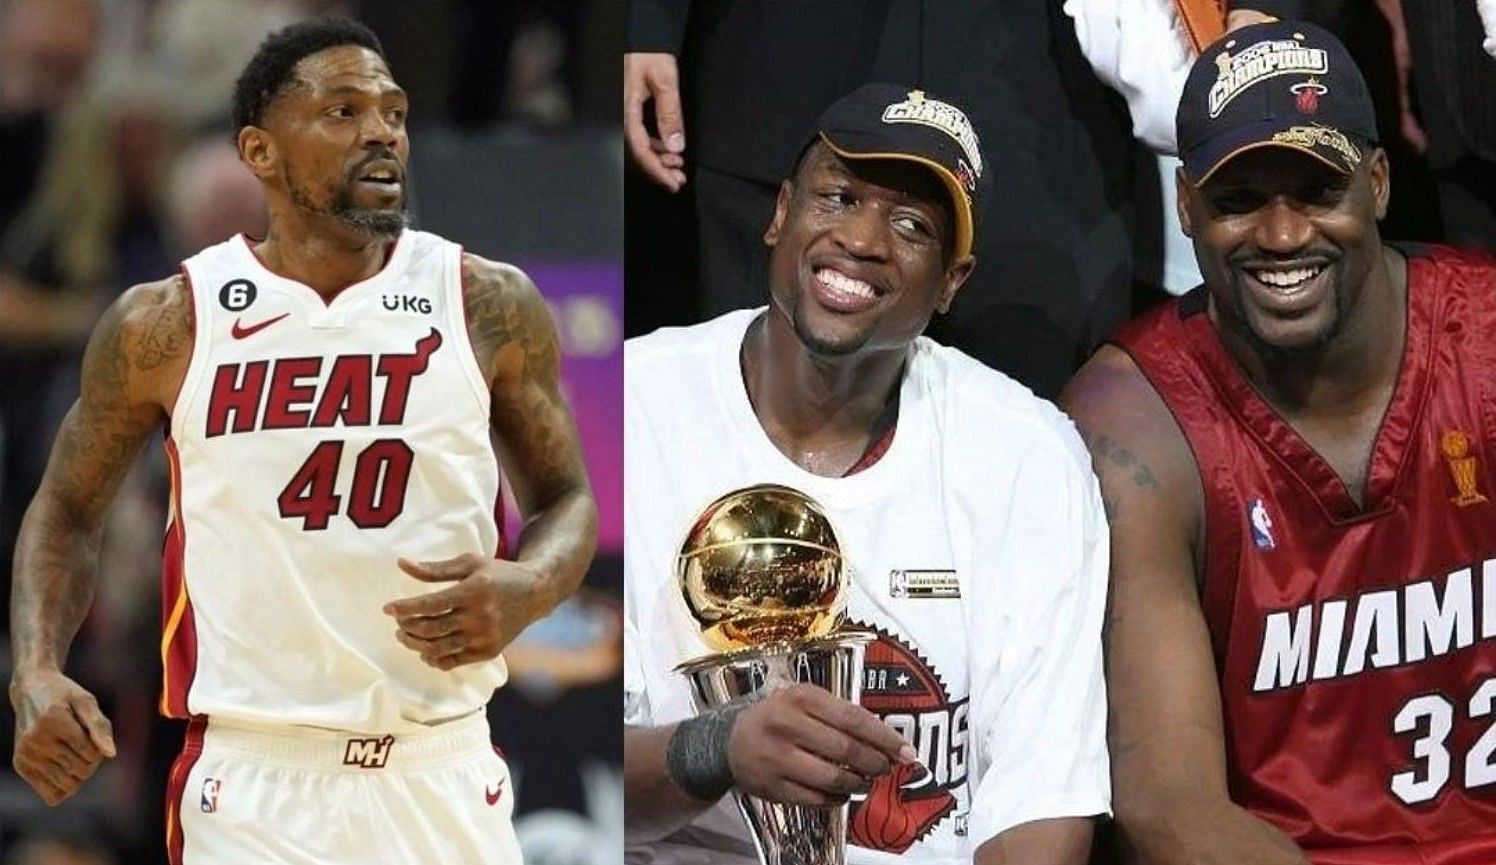 Udonis Haslem and Dwyane Wade were promised by Shaquille O